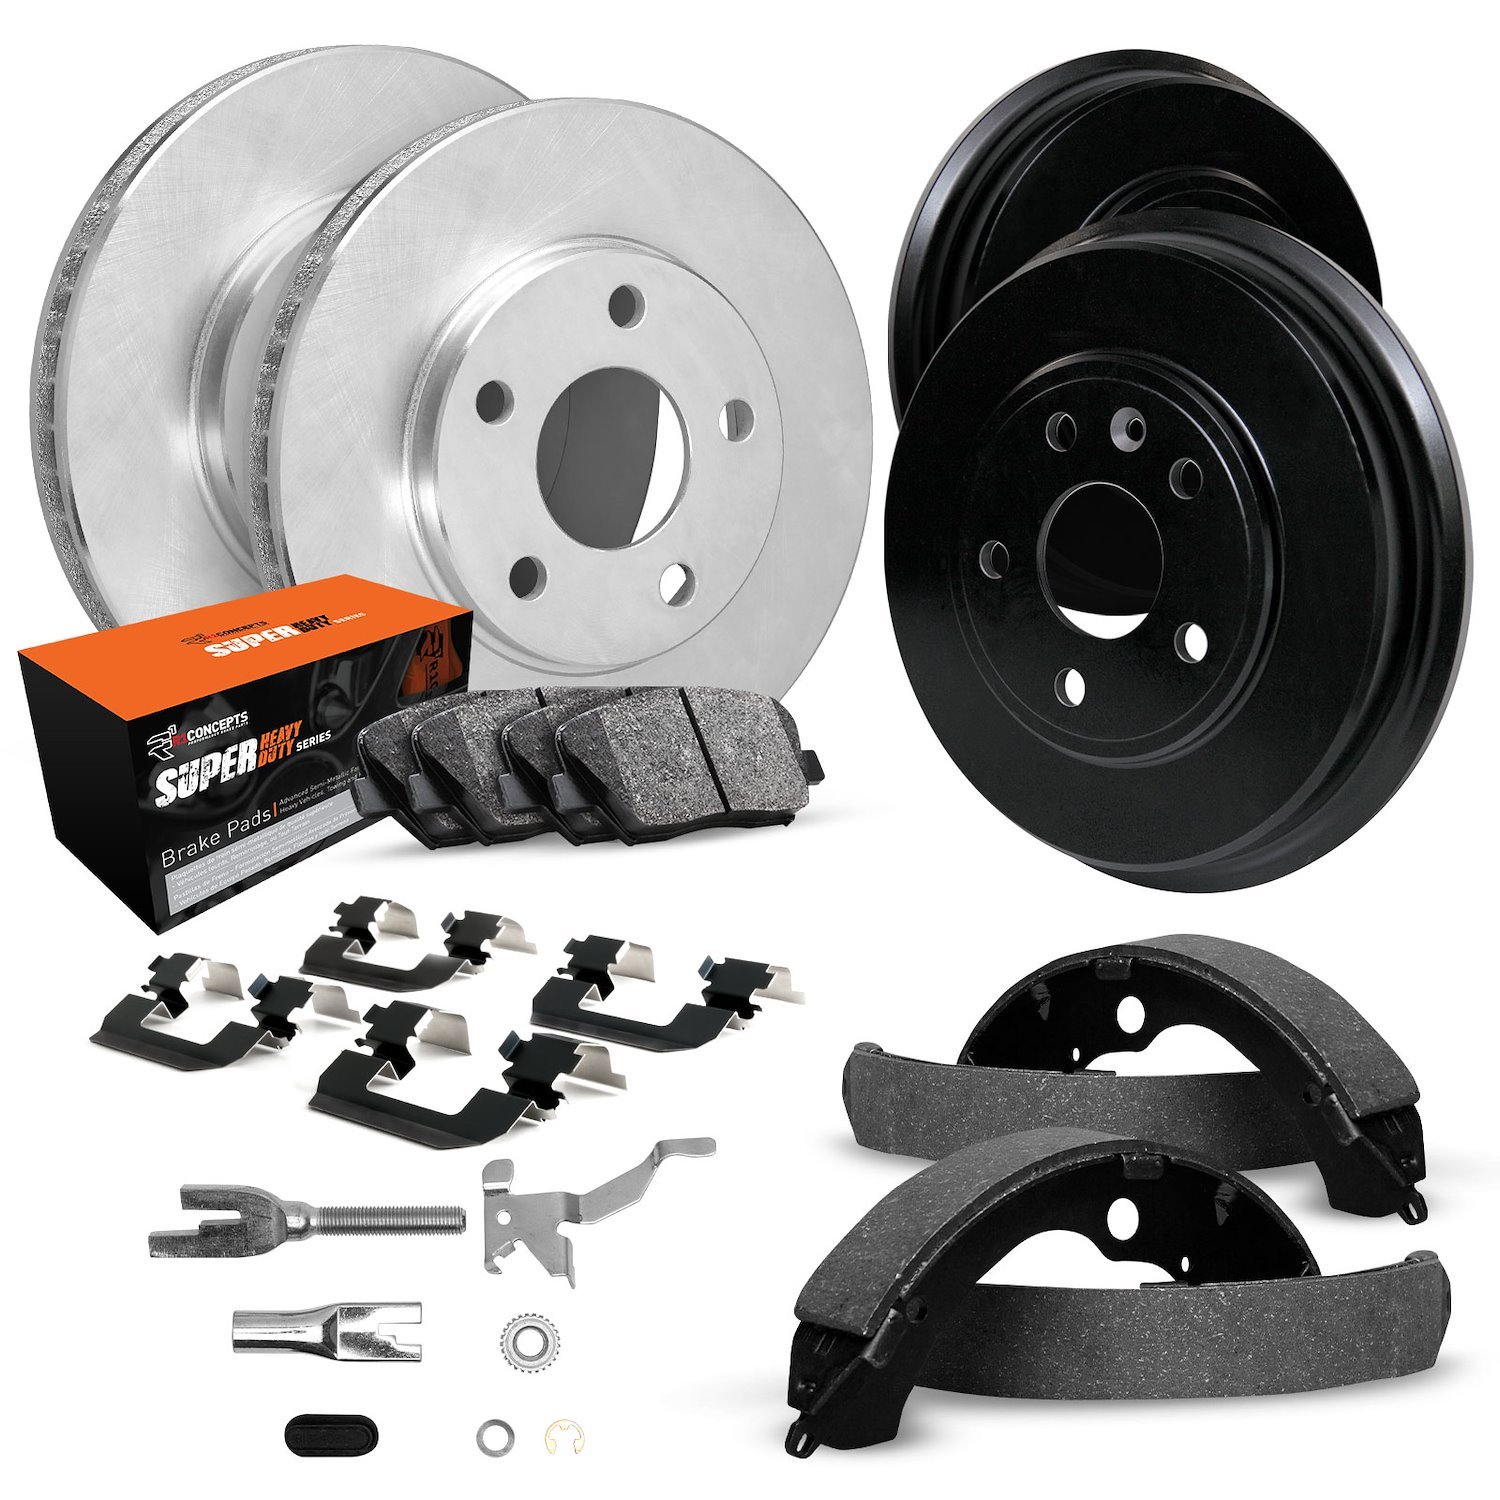 E-Line Blank Brake Rotor & Drum Set w/Super-Duty Pads, Shoes, Hardware, & Adjusters, 1988-2000 GM, Position: Front & Rear